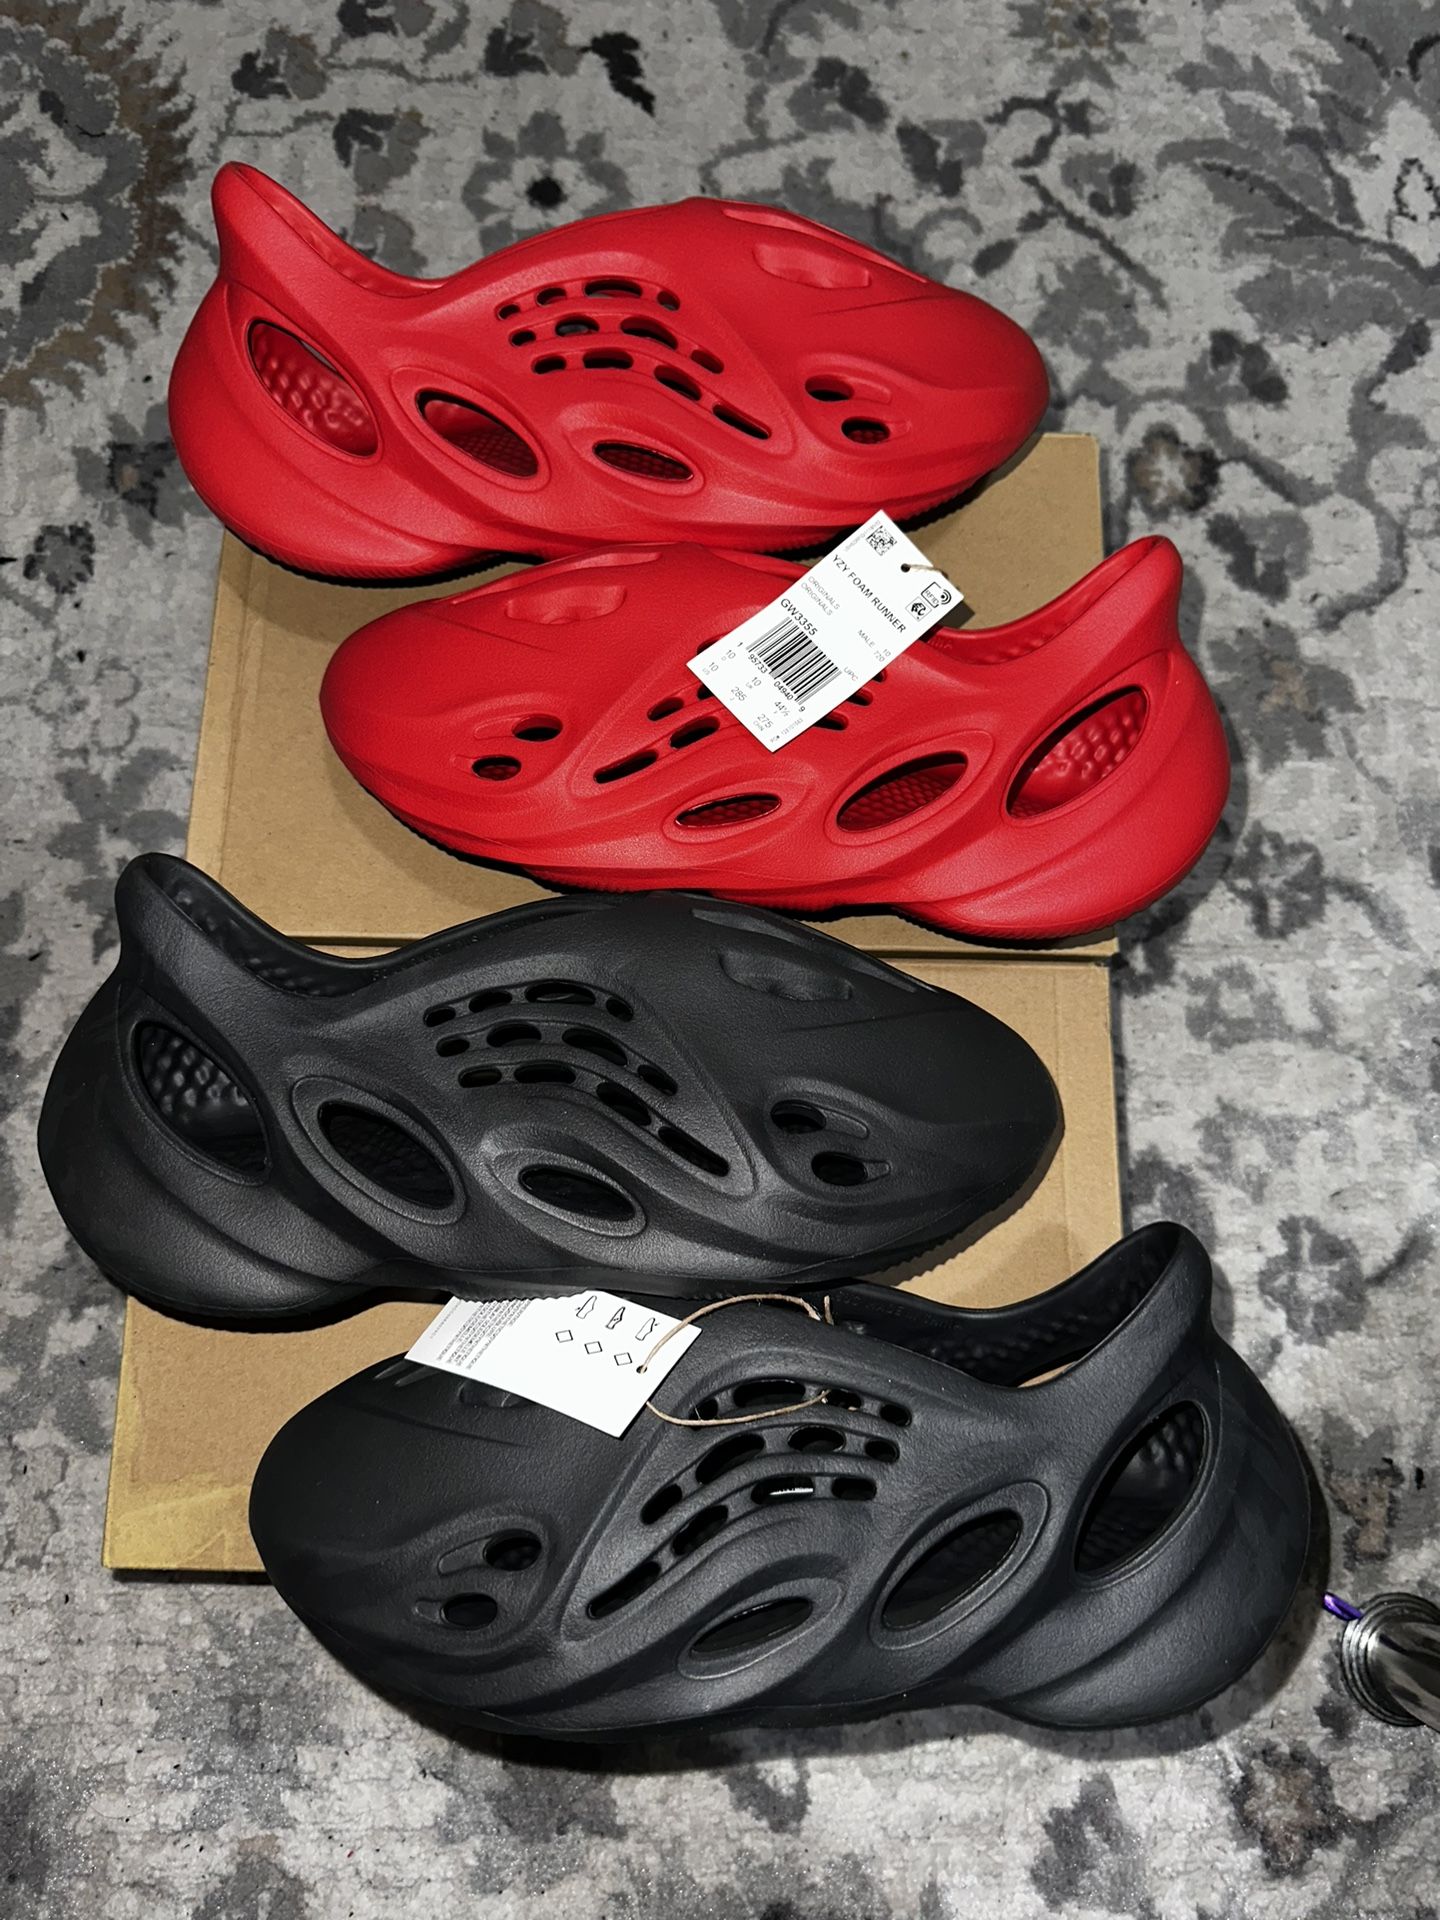 Yeezy Foam Runner And Slides for Sale in Queens, NY - OfferUp